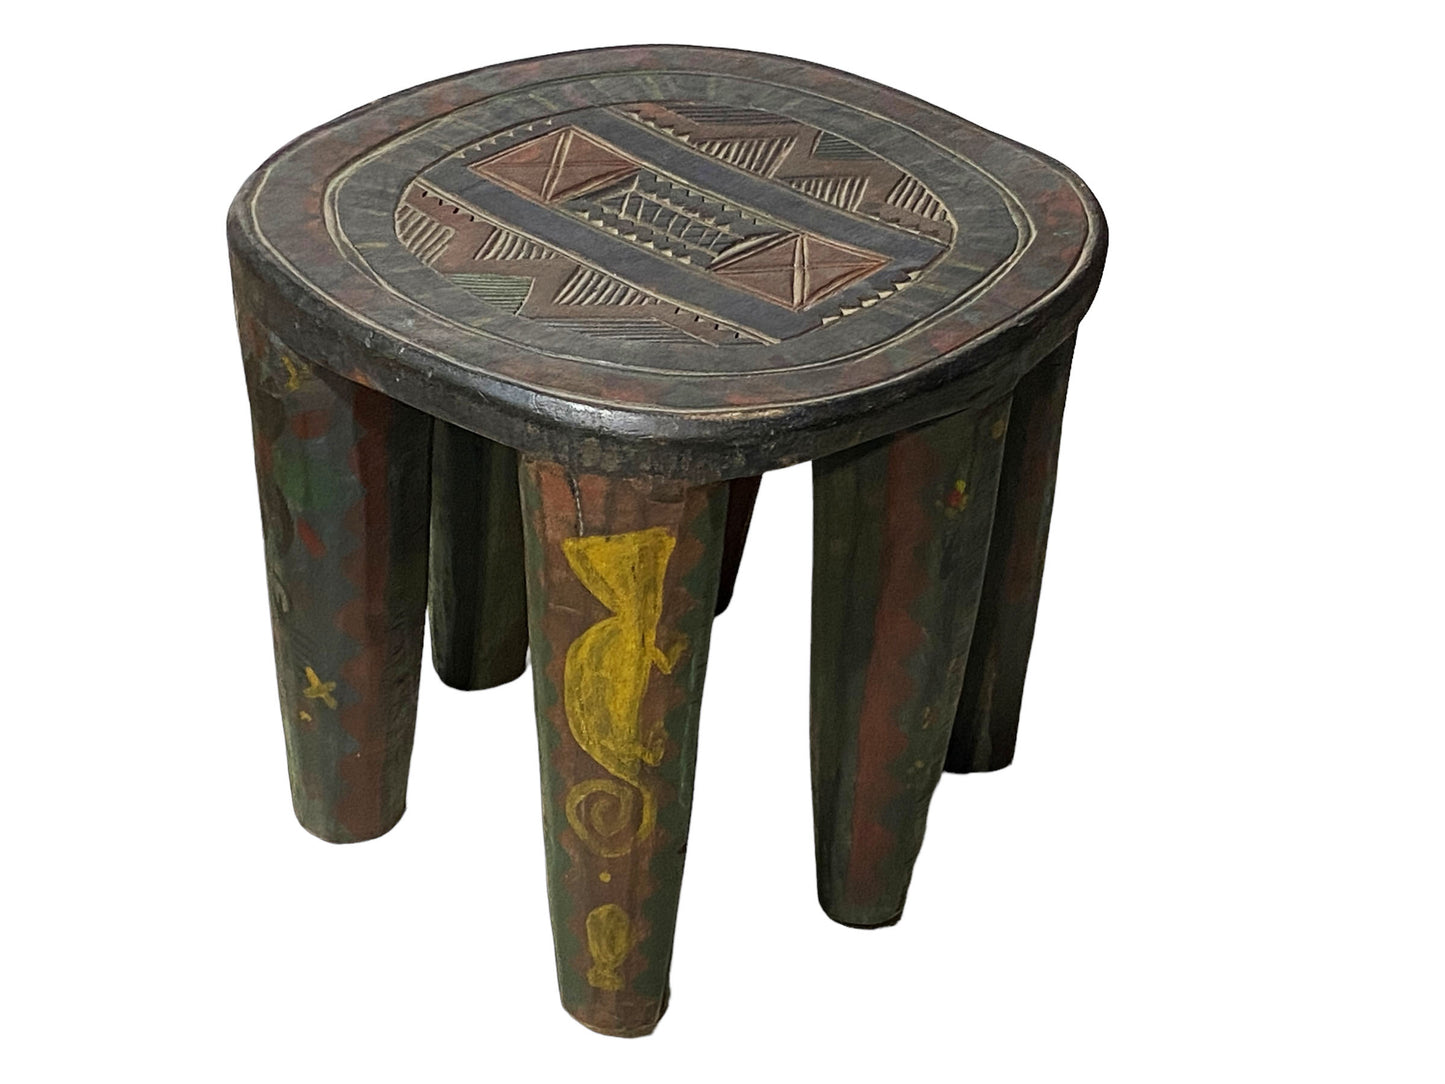 #5546 African LG Colorful  Nupe Stool / Table Nigeria  14" H by 15.25" W